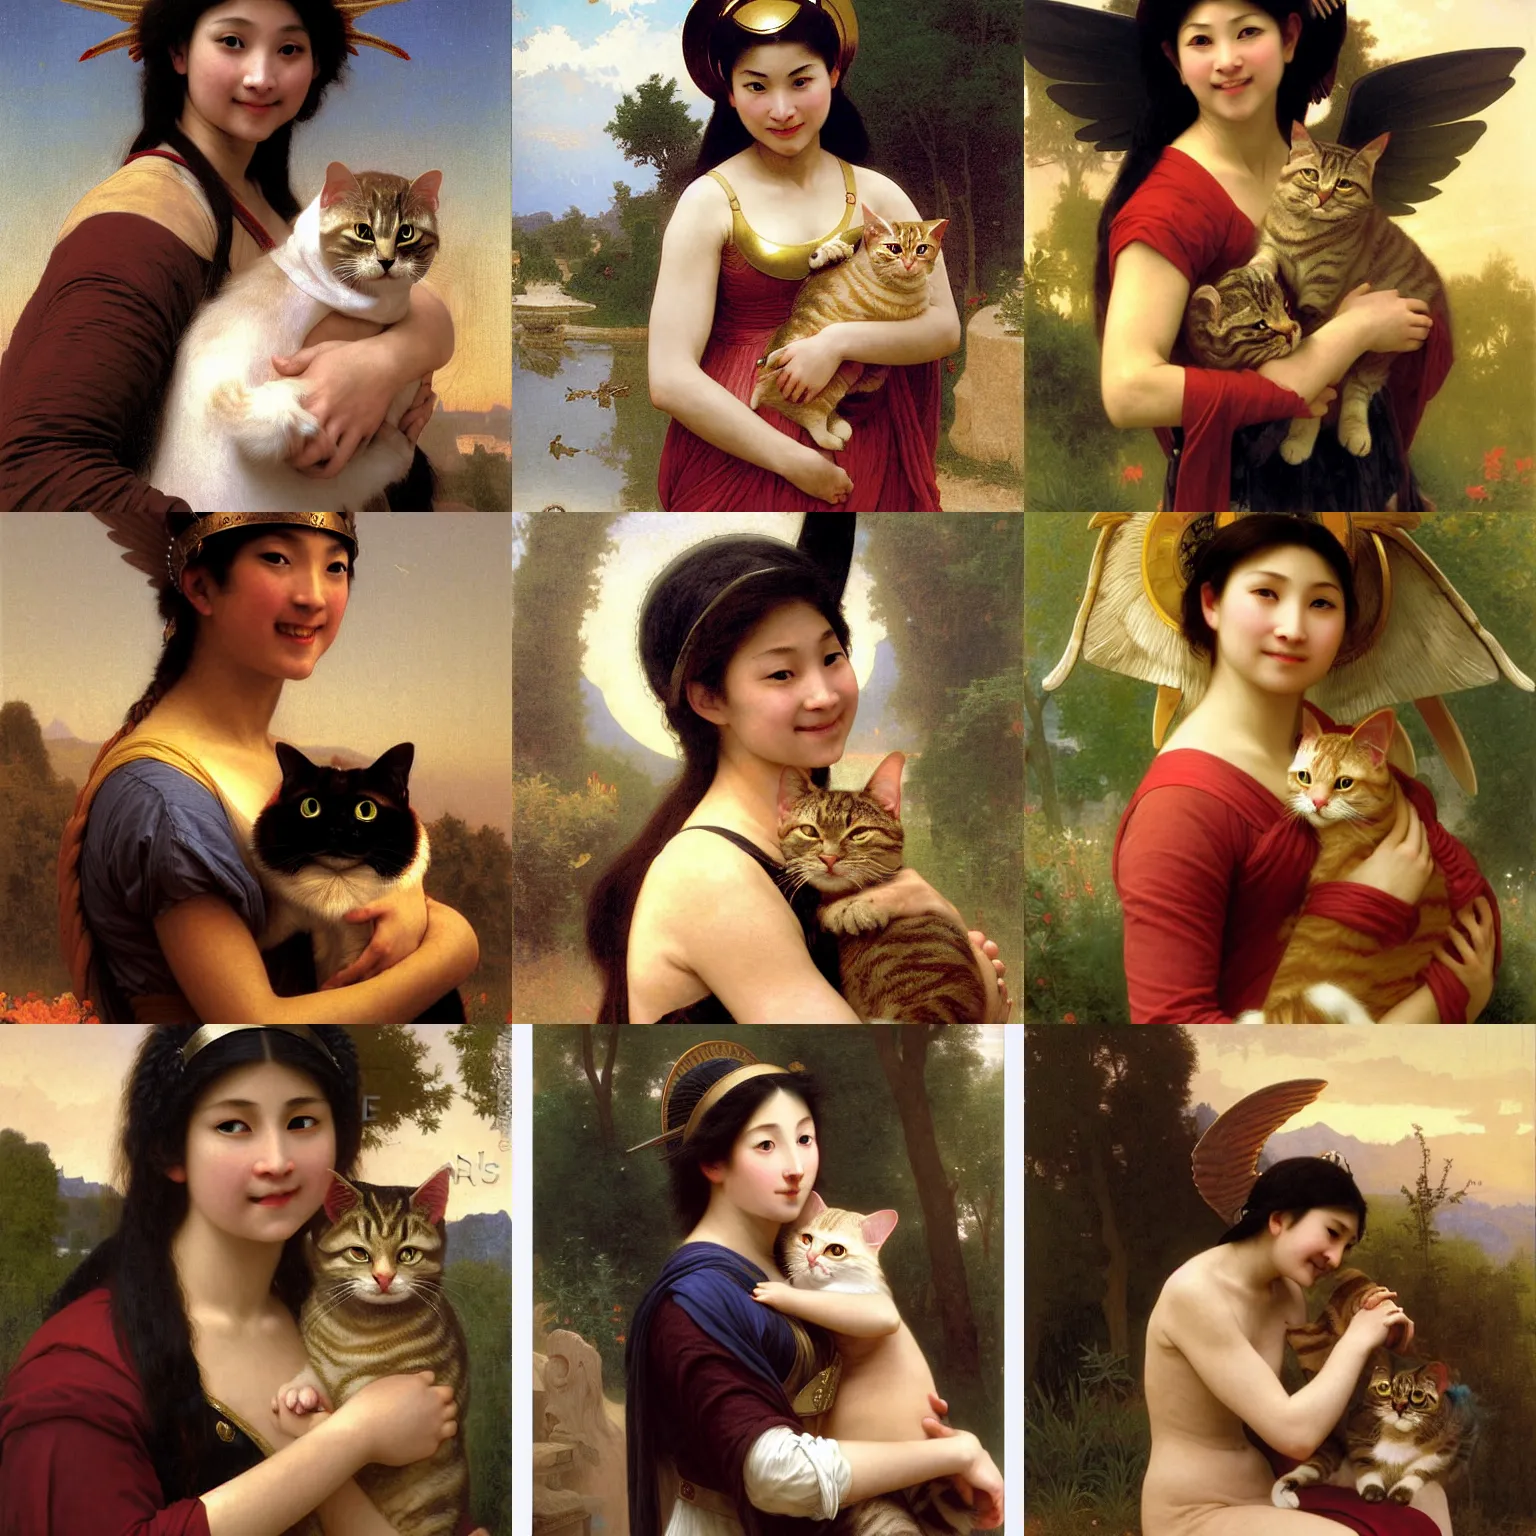 Prompt: Smiling sorceress holding a tabby cat, wearing a winged helmet. Skinny asian woman with short-cut shoulder length hair, wearing a winged helmet. Art by William-Adolphe Bouguereau. During golden hour. Extremely detailed. Beautiful. 4K. Award winning.